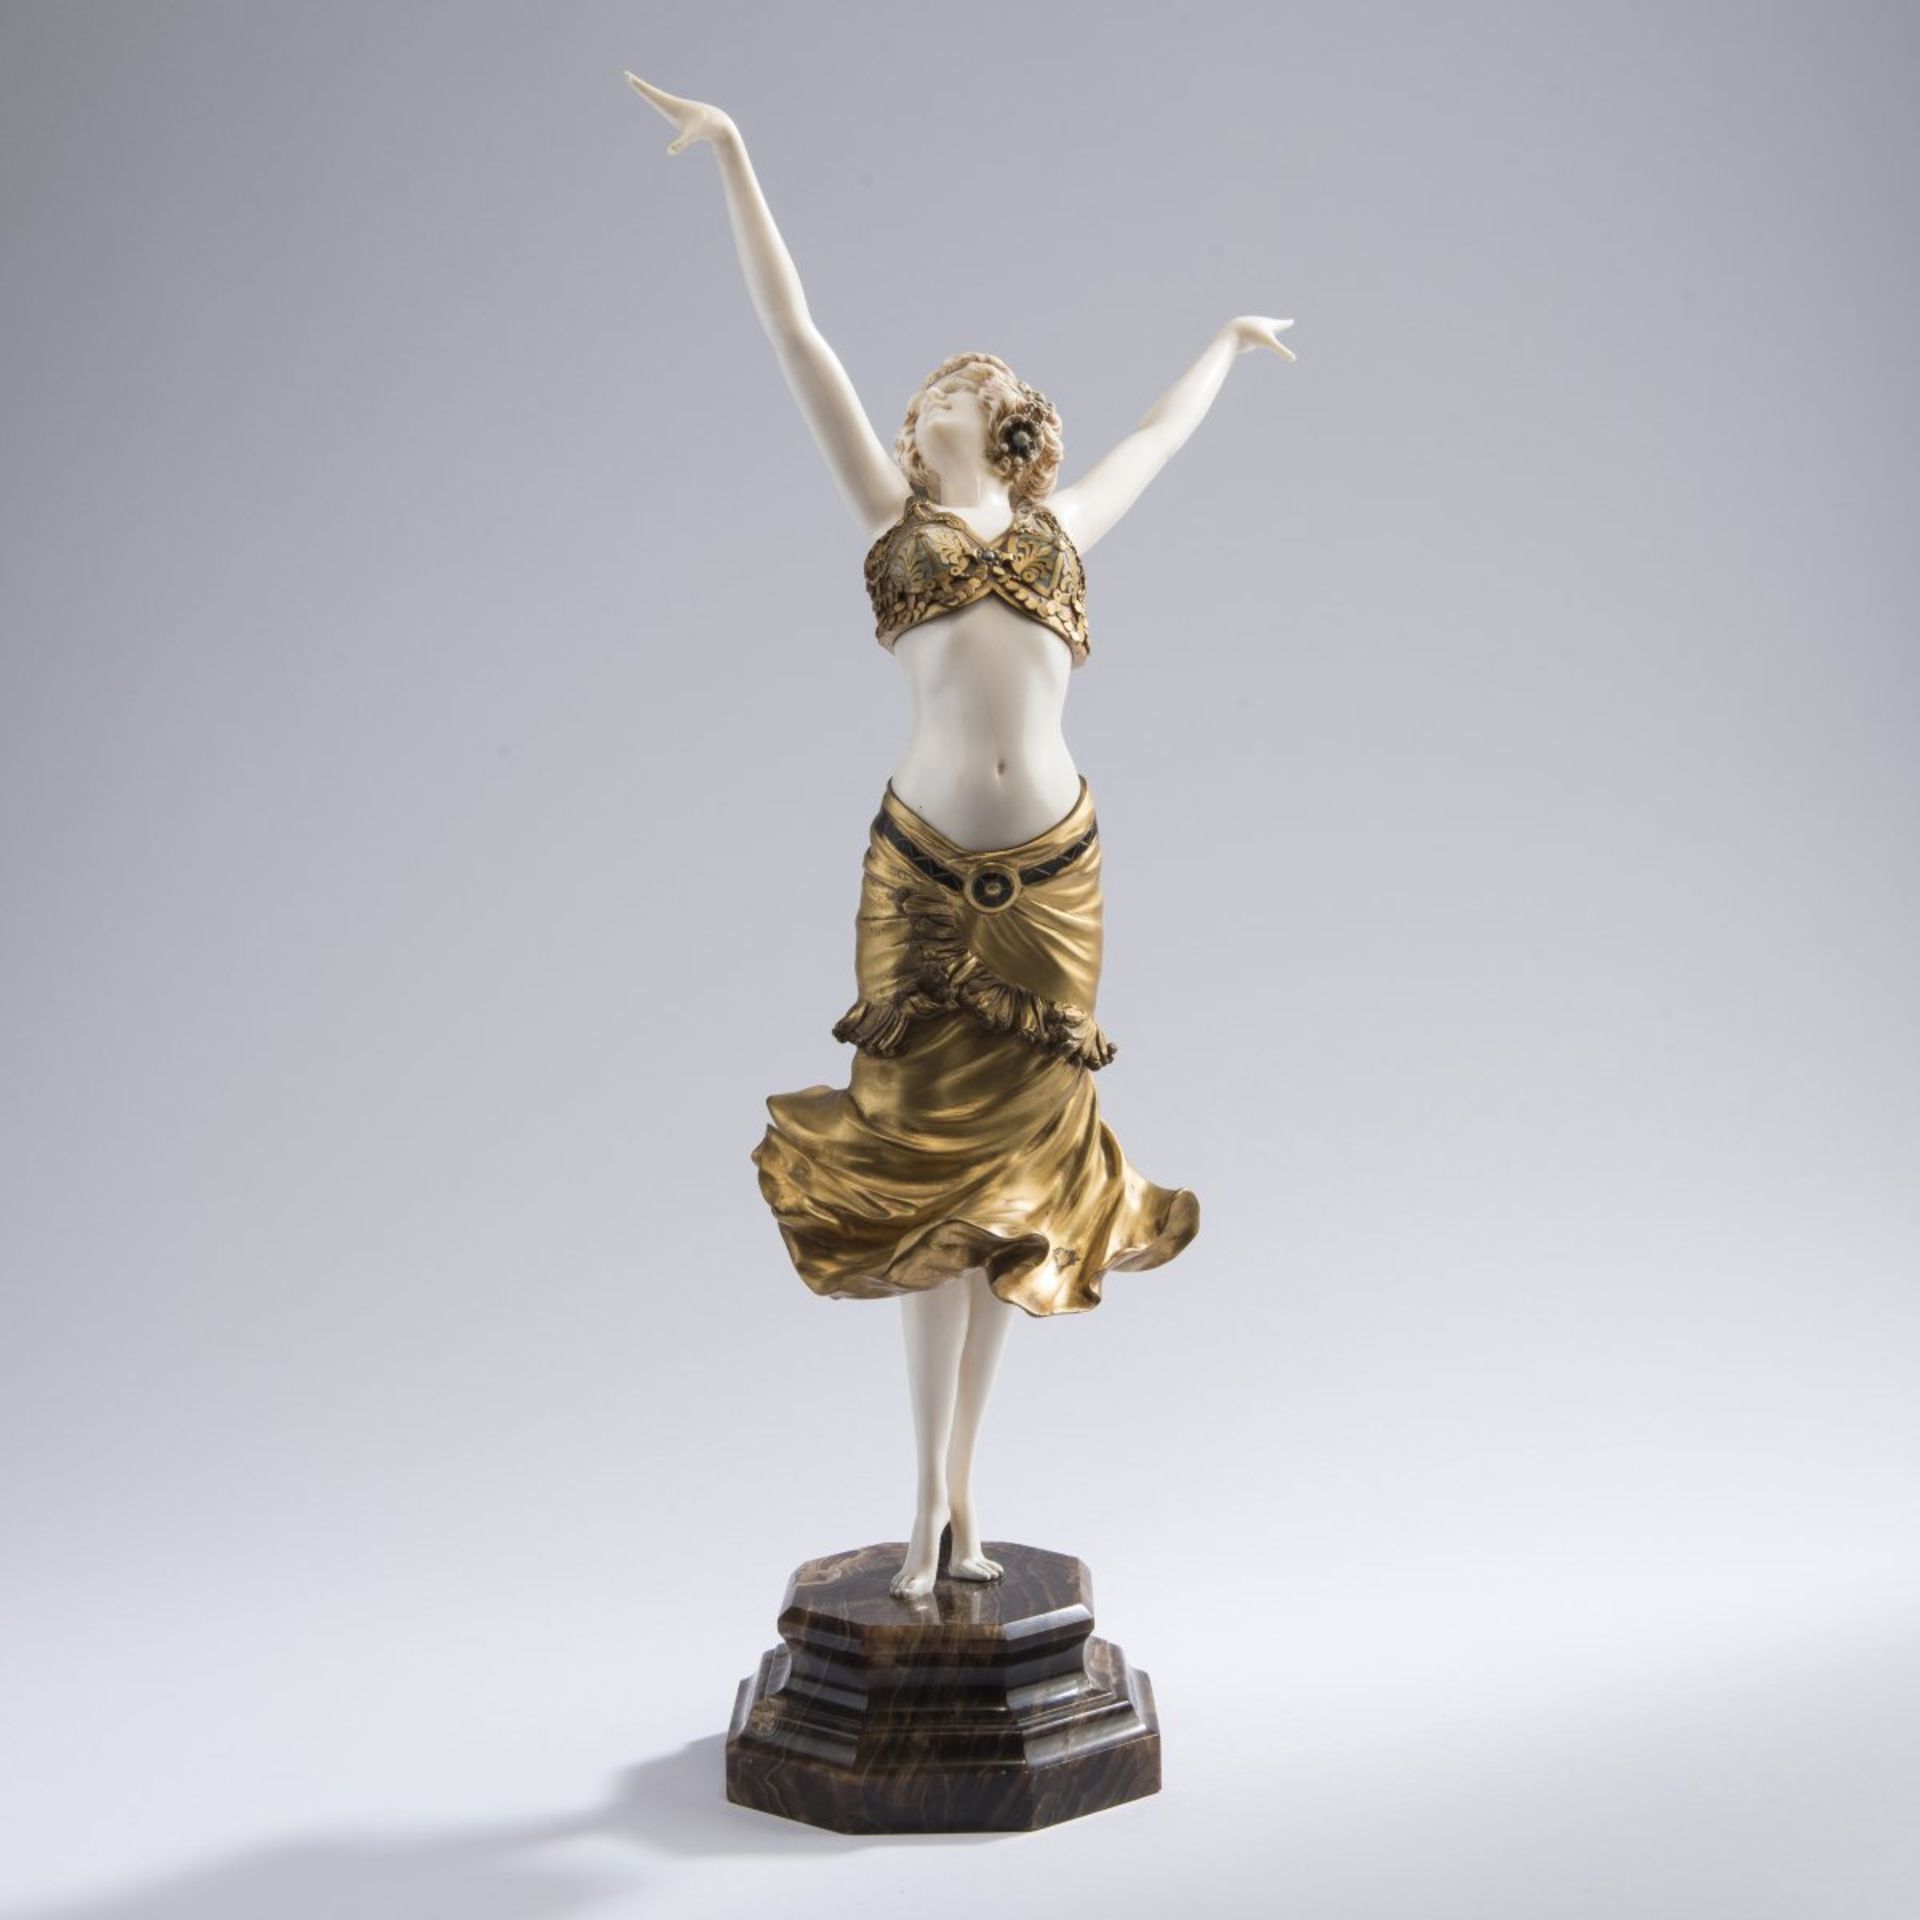 Paul Philippe, 'Radha', 1920s'Radha', 1920sH. 56.3 cm (with base). Cold-painted bronze, gilded.